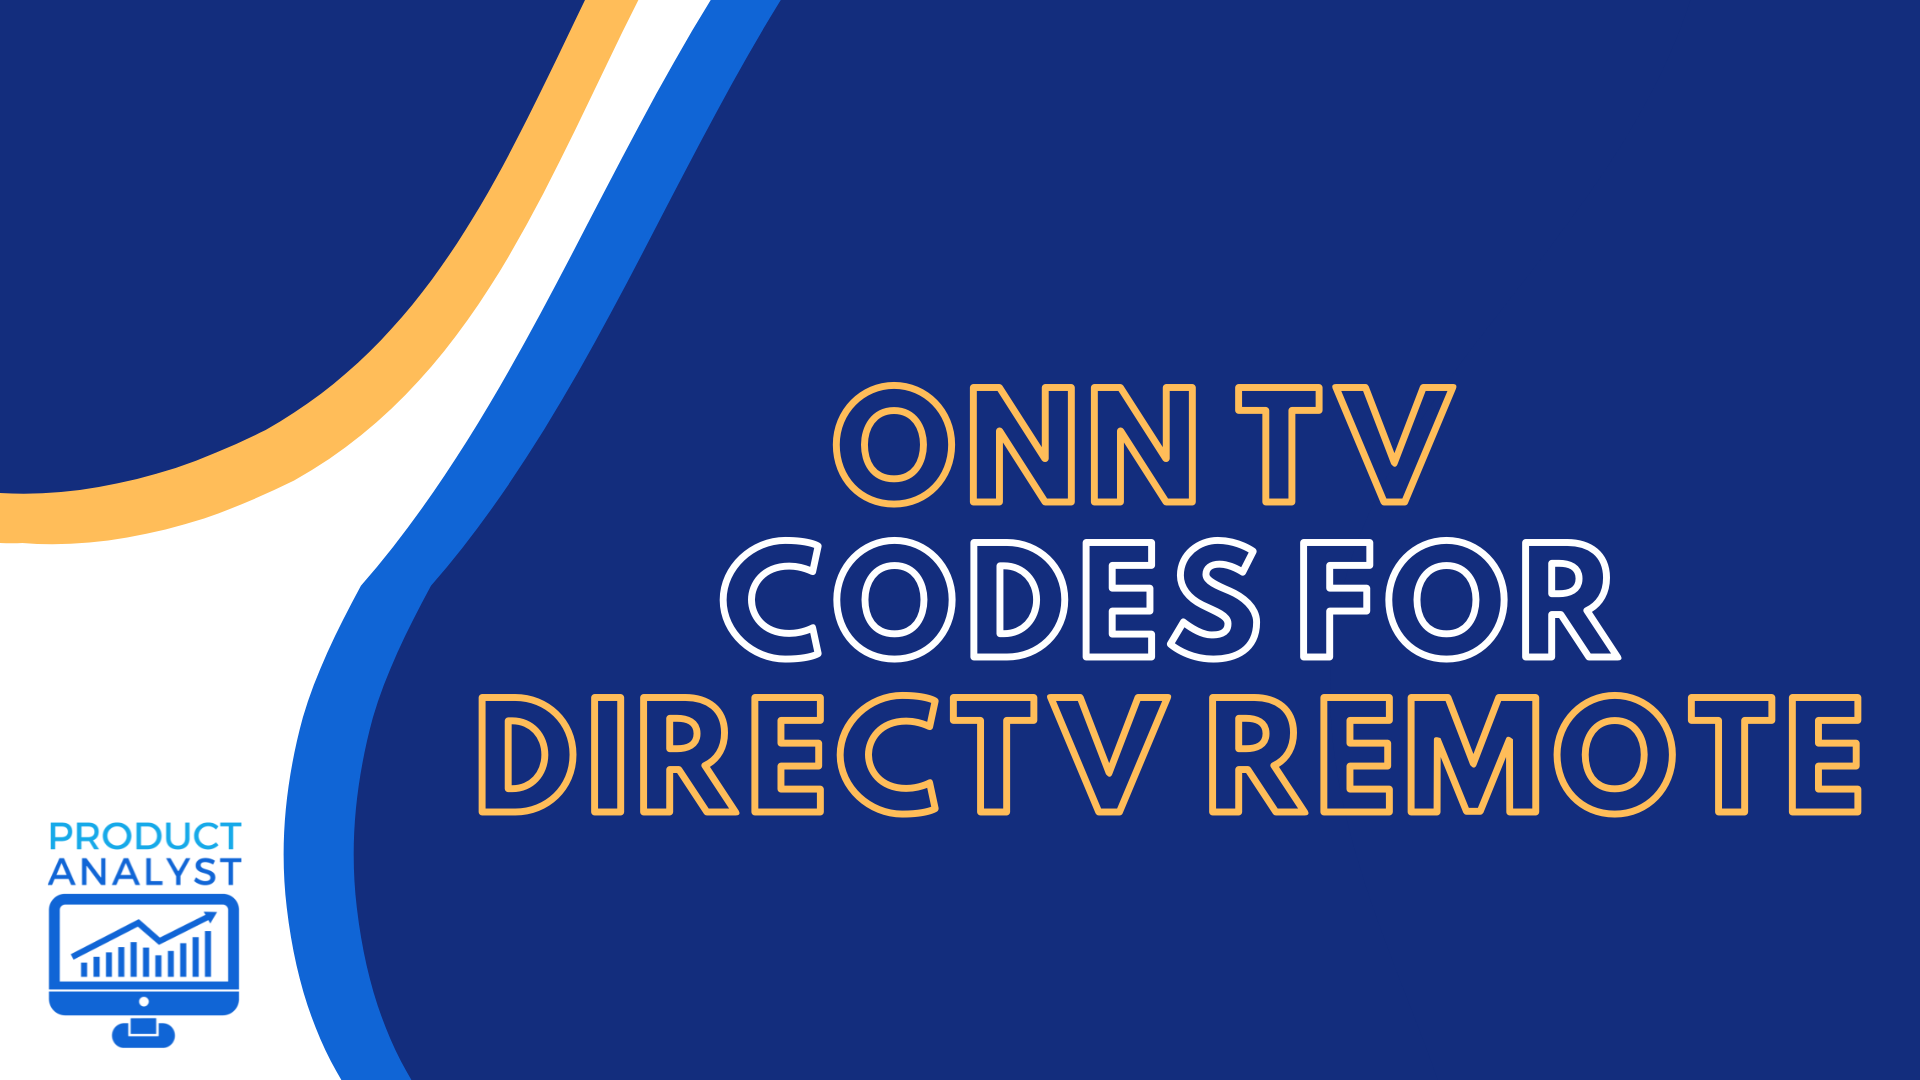 1. Spectrum Remote Control Codes for ONN TV - wide 1